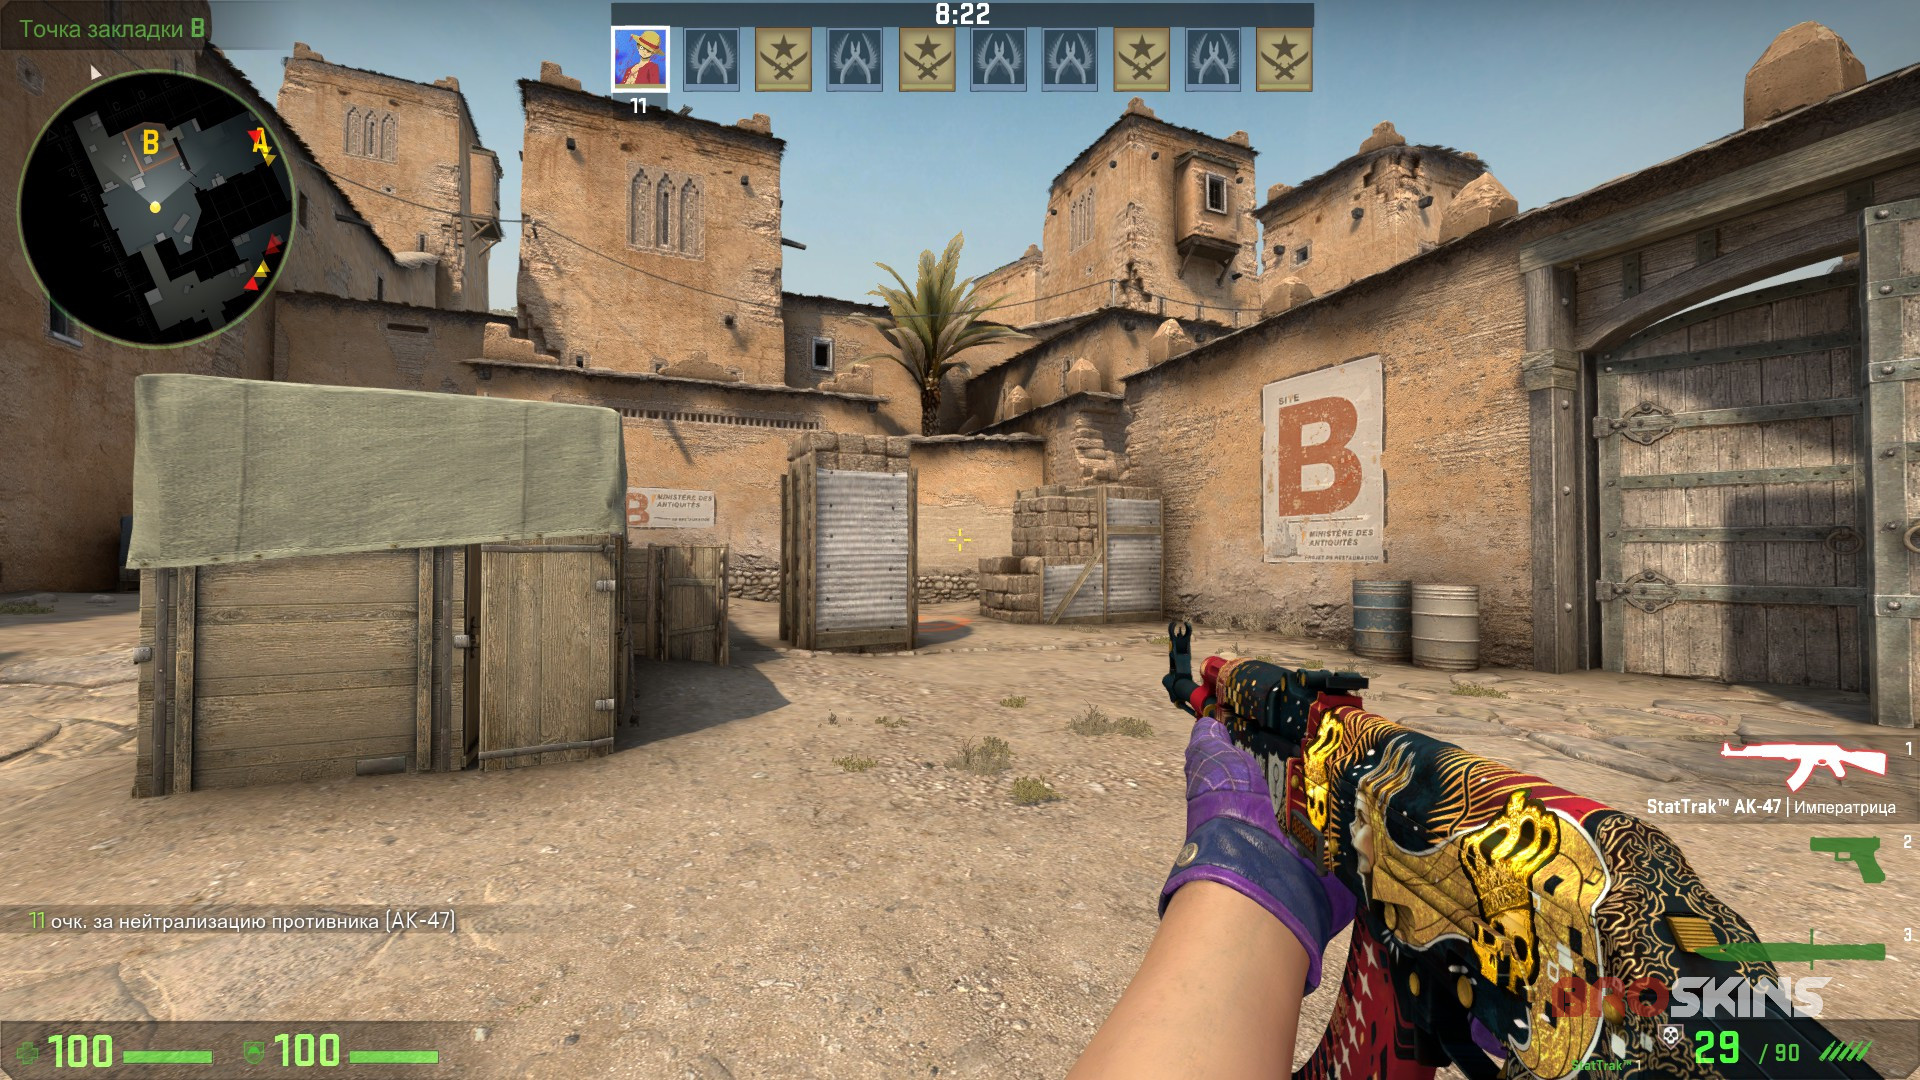 StatTrak™ AK-47 The Empress double Crown (Foil) and Gloves Imperial Plaid